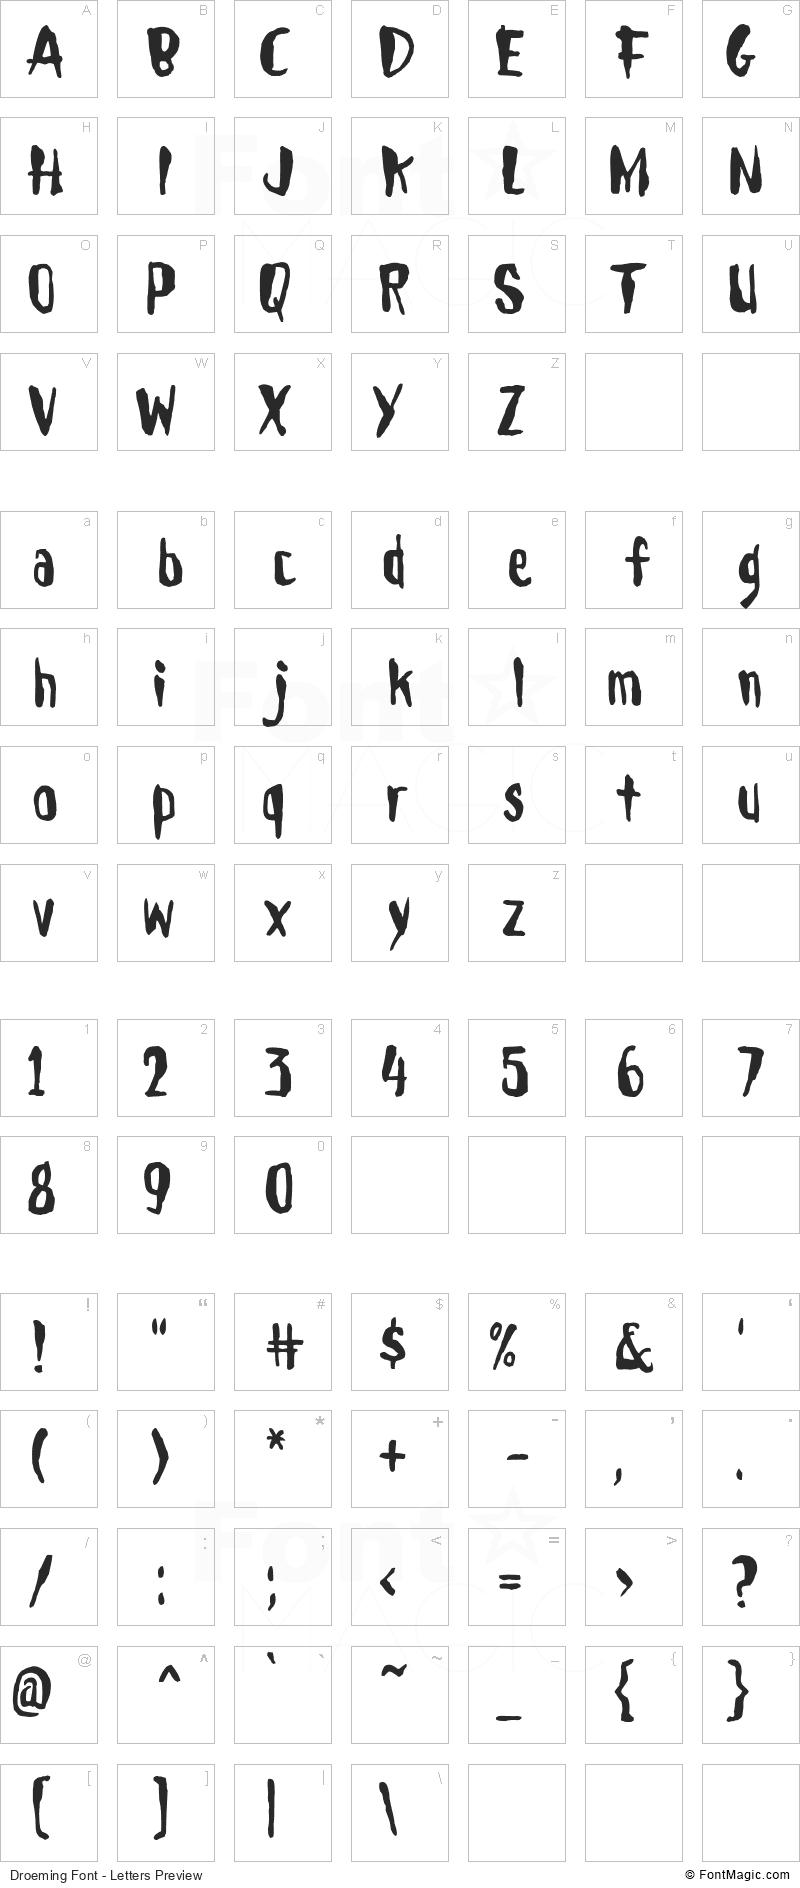 Droeming Font - All Latters Preview Chart